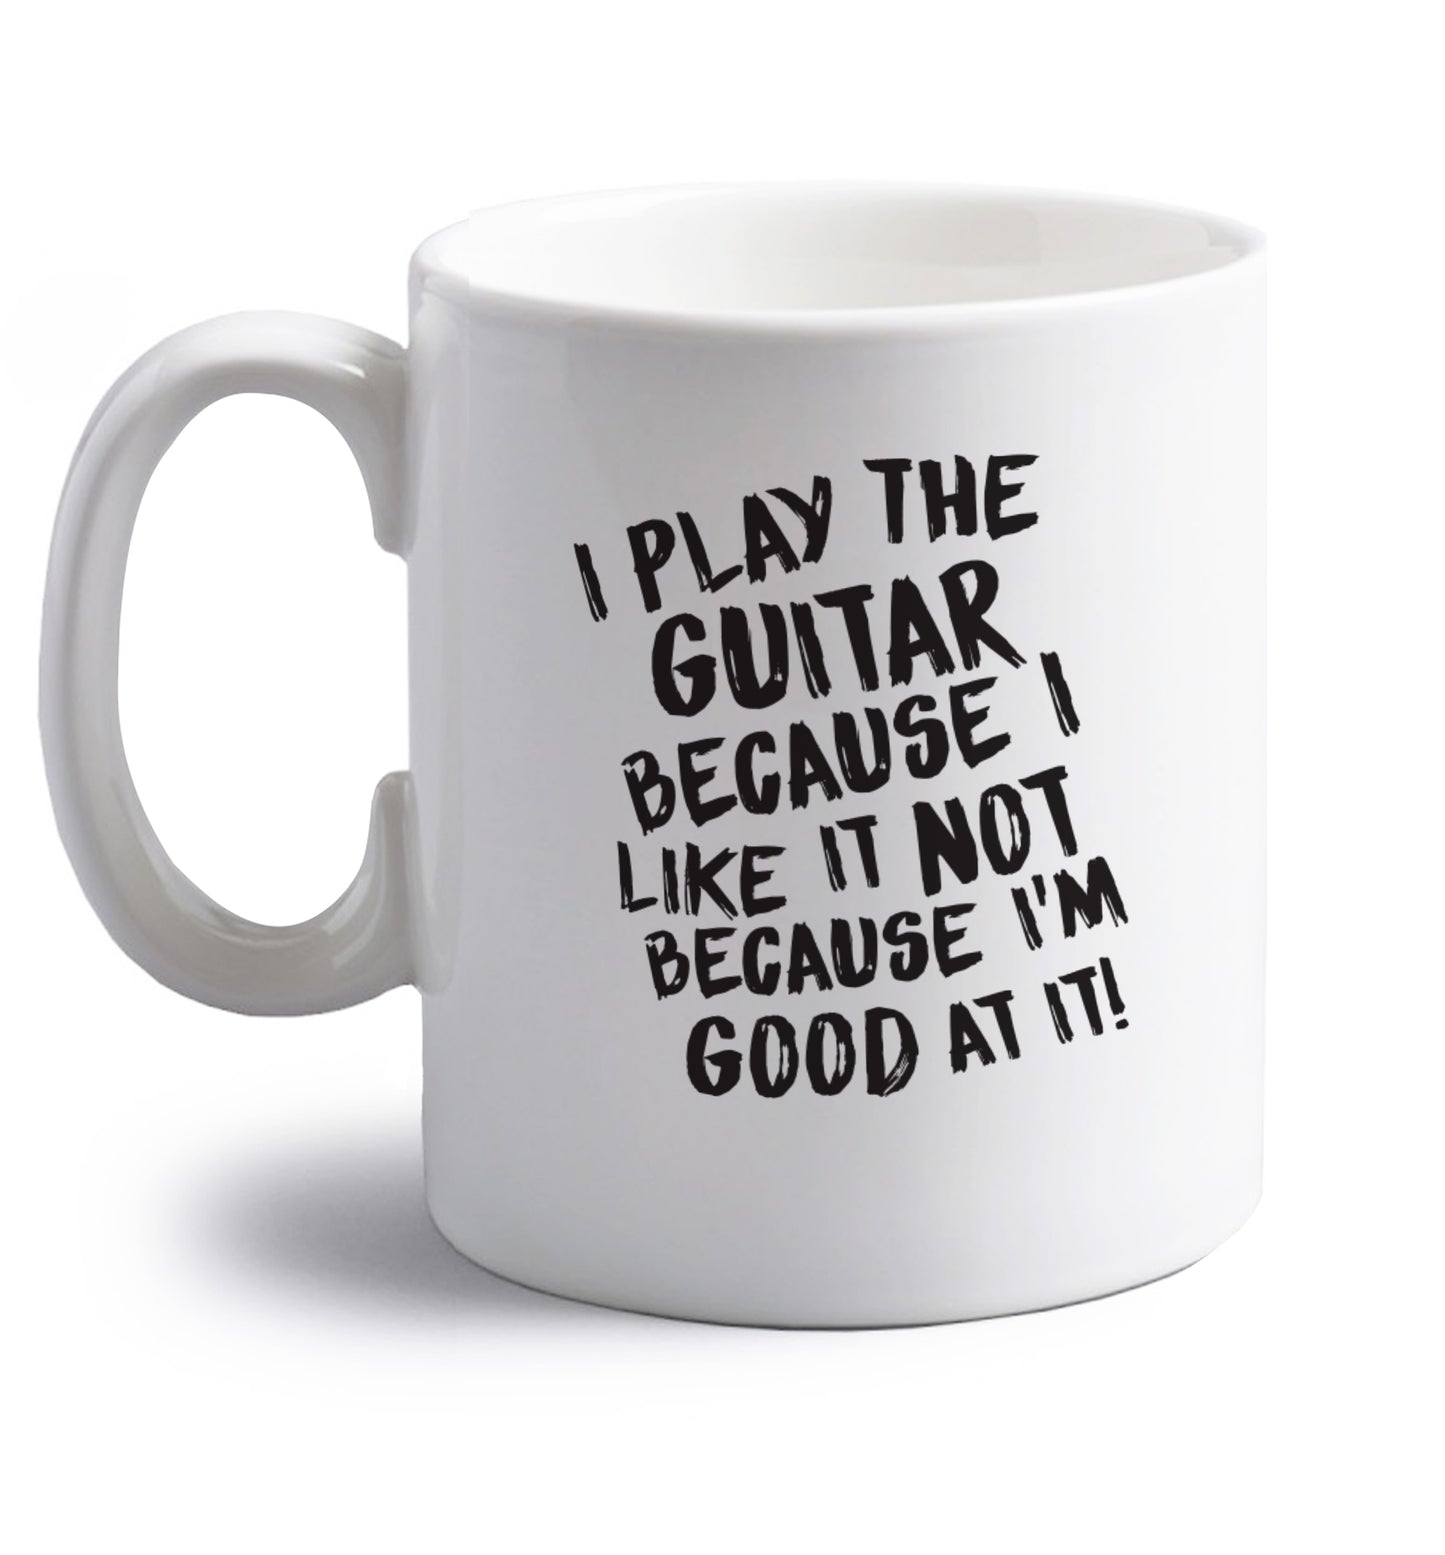 I play the guitar because I like it not because I'm good at it right handed white ceramic mug 